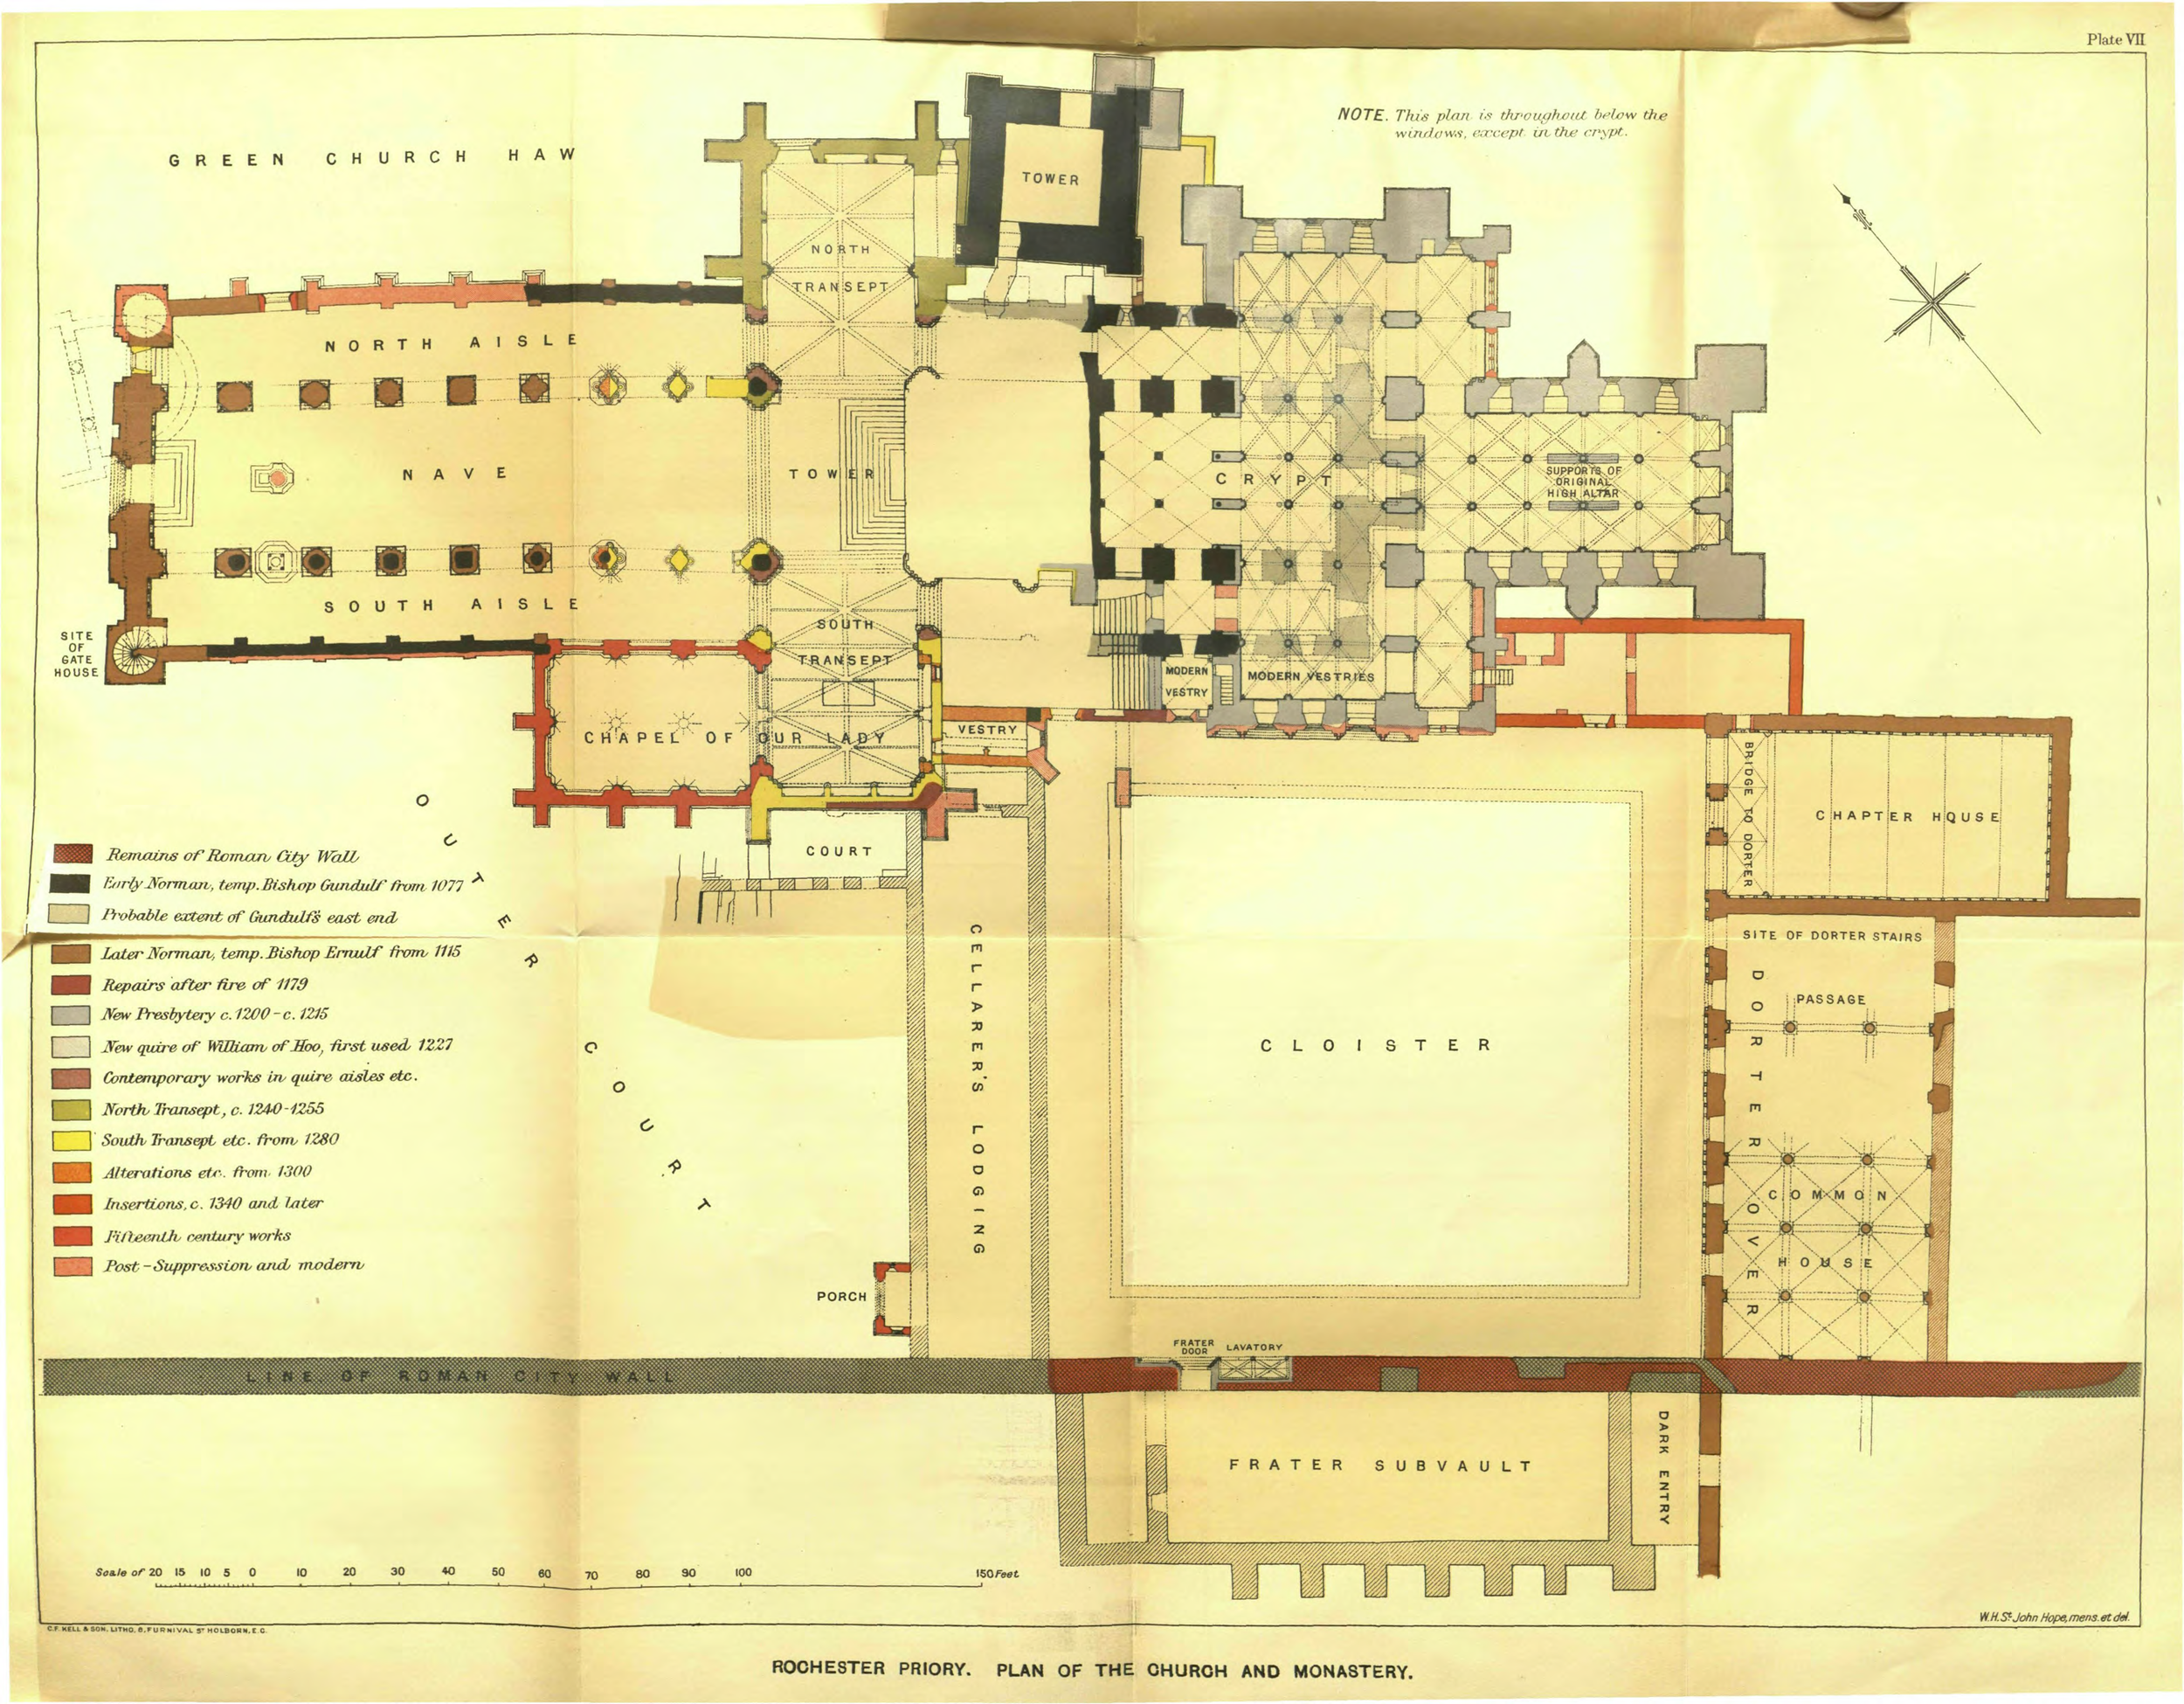 1989_w_s_hope_rochester_priory_plan_of_the_church_and_monastery (deleted 81394f98acaa6b7e9ca437b9e582cadf).png